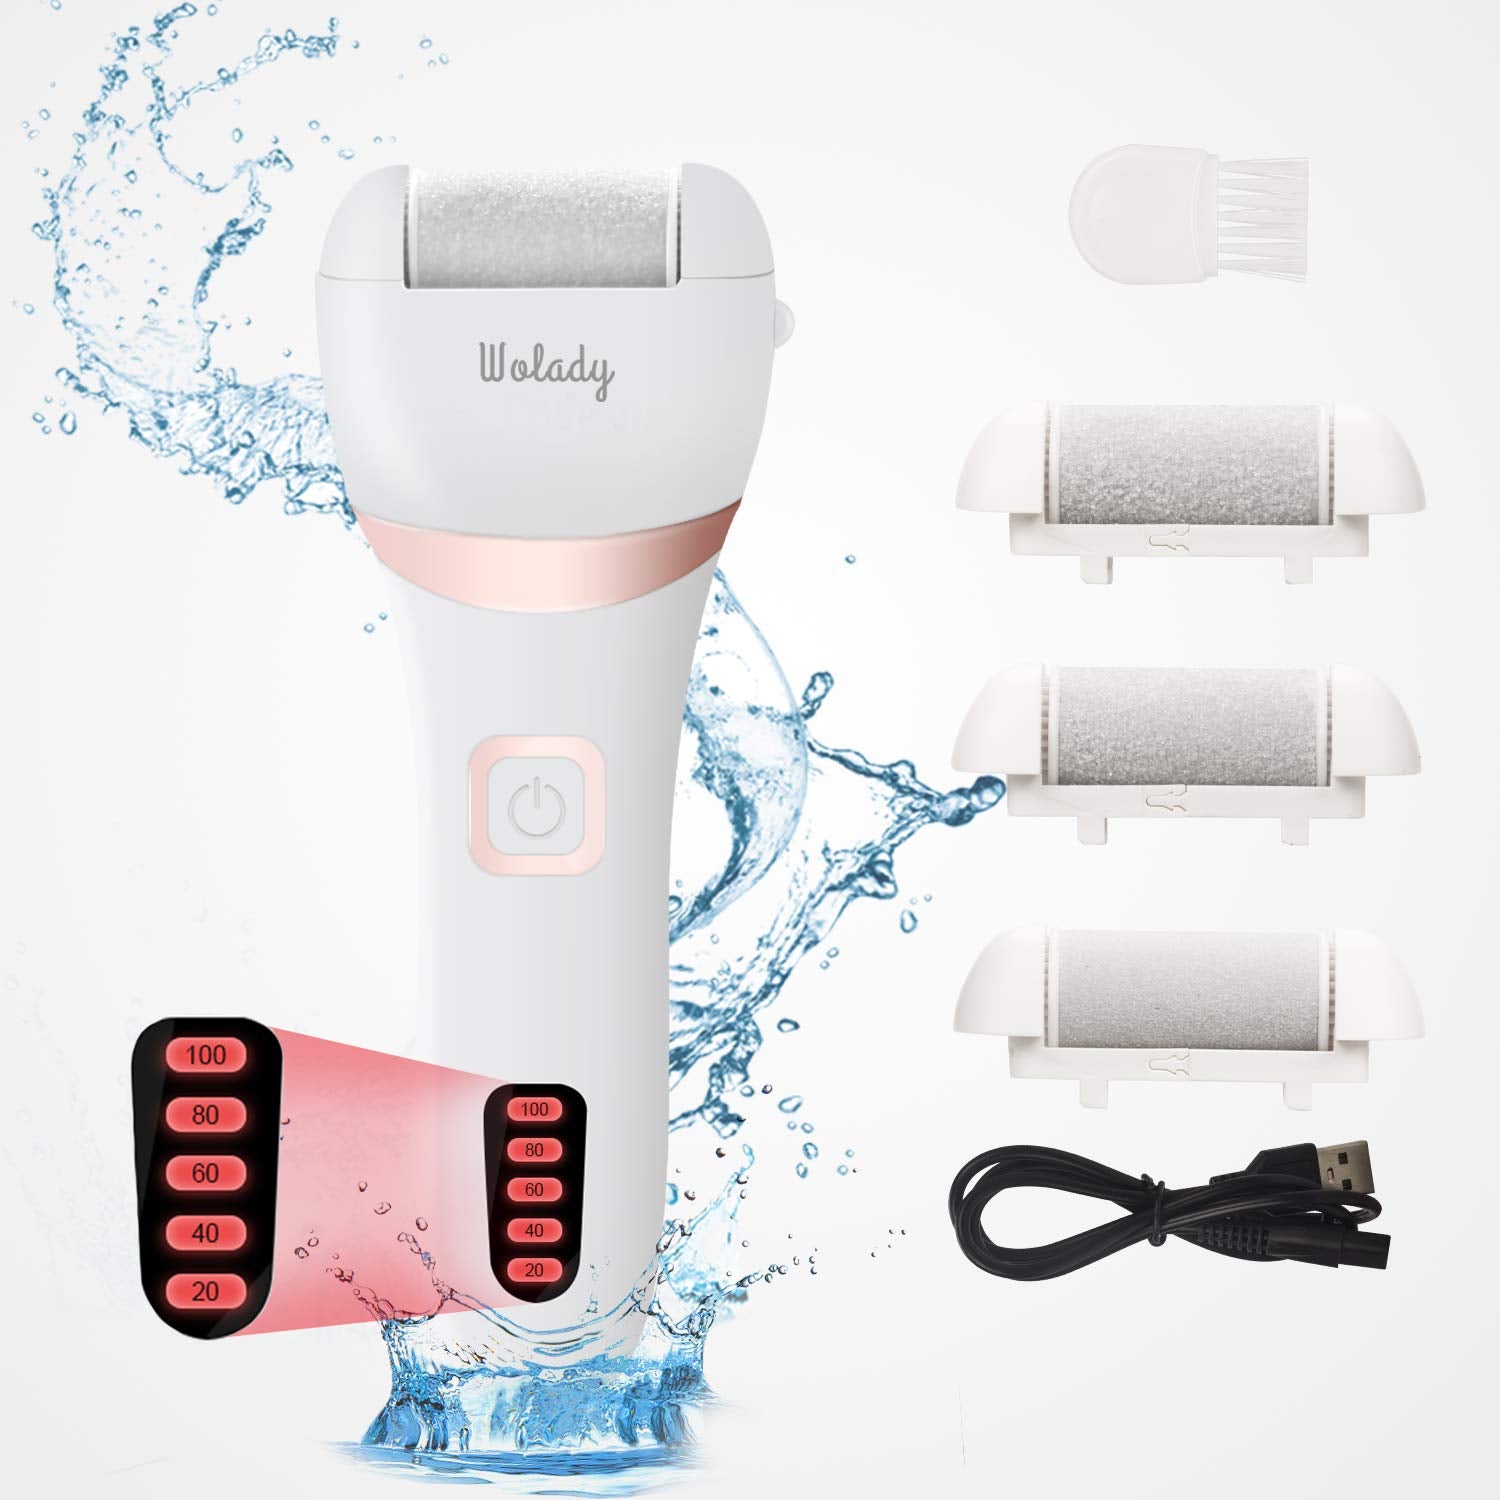 Wolady Electric Foot File, Hard Skin Remover Rechargeable Feet Scrubber Shaver Waterproof Callus Remover for Dry Dead Cracked Feet with 3 Roller Heads, White